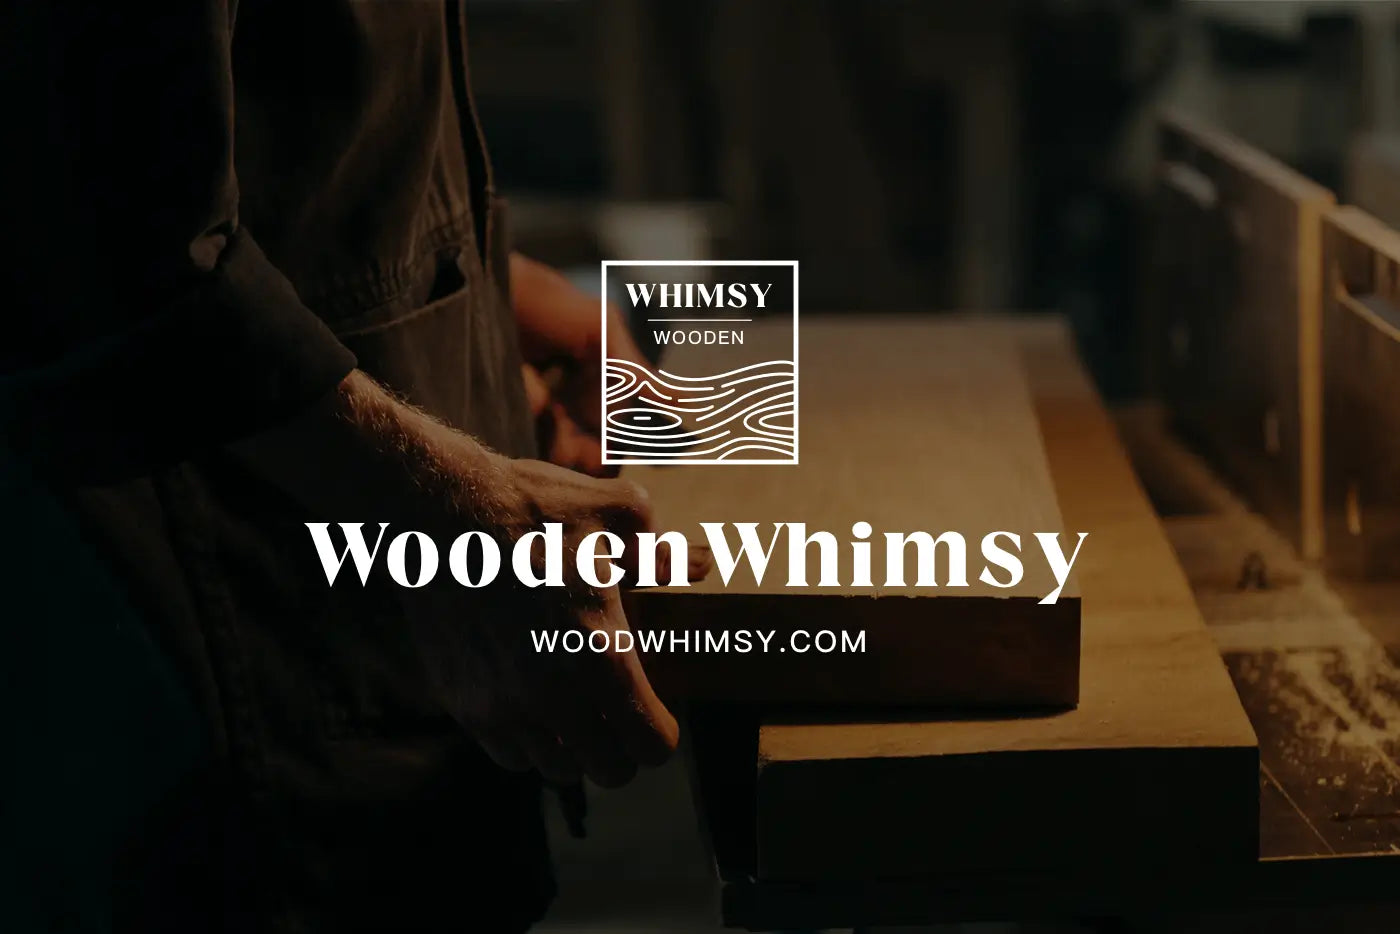 Meet the brand “Wooden Whimsy”!